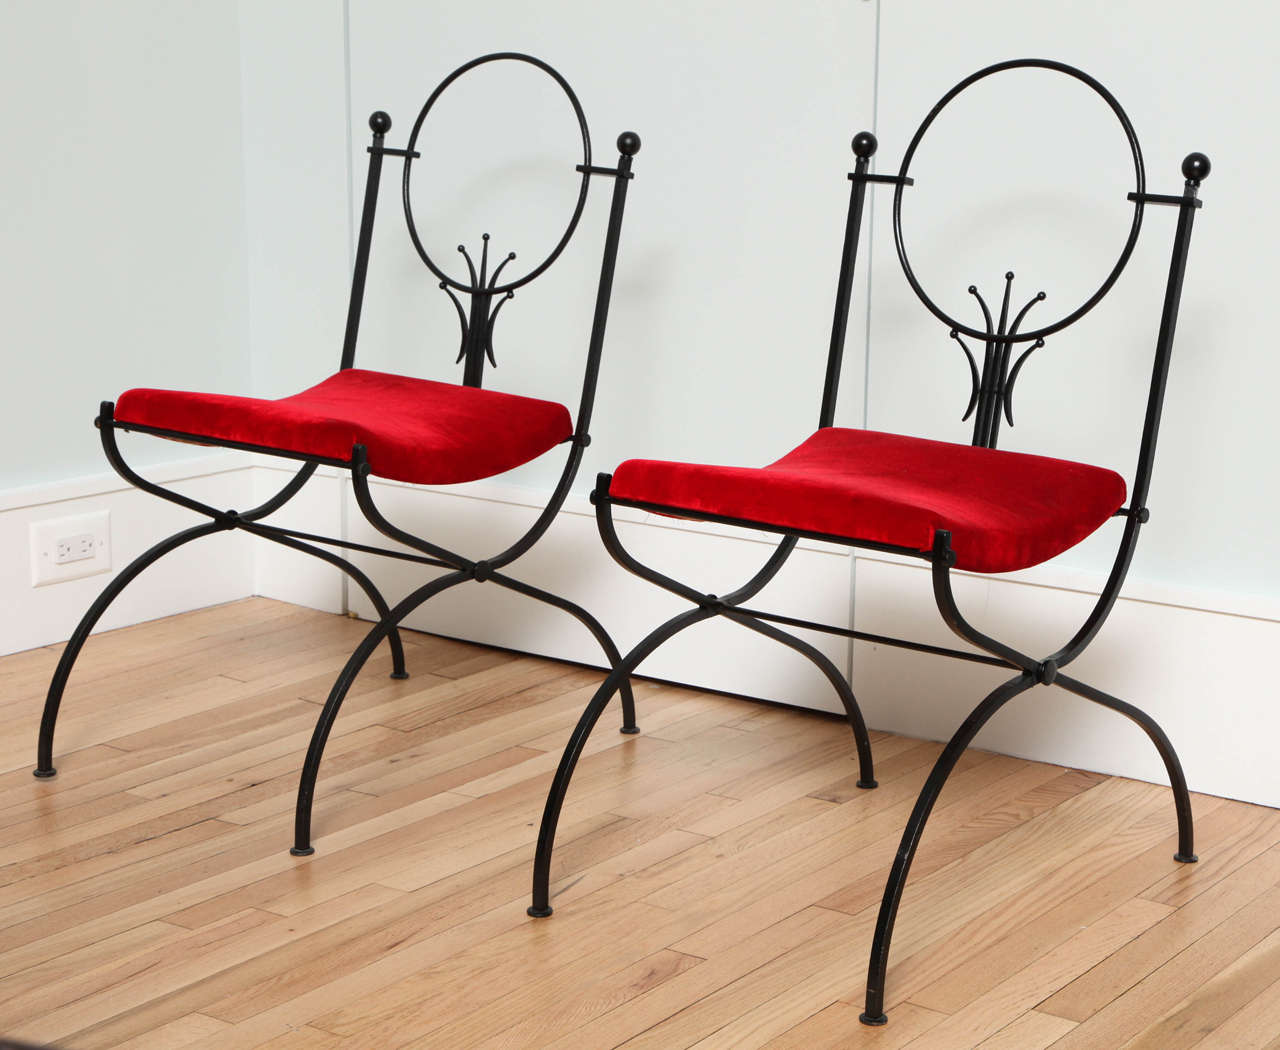 Pair of black-painted, wrought iron small chairs, attributed to Raymond Subes, circa 1950. Upholstered in red silk-velvet.